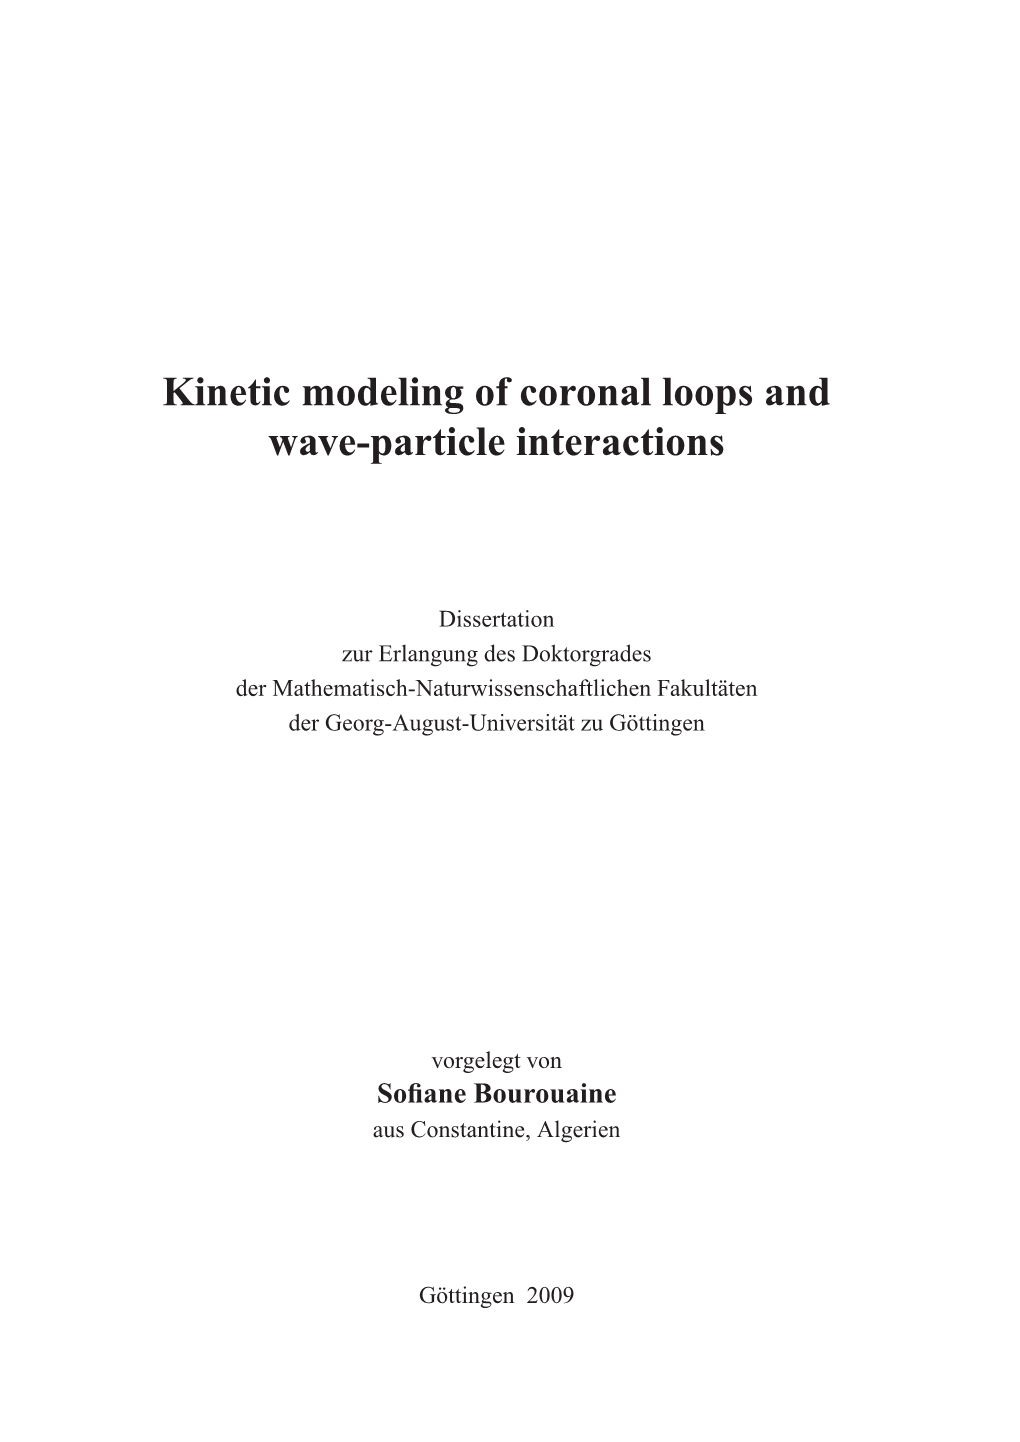 Kinetic Modeling of Coronal Loops and Wave-Particle Interactions